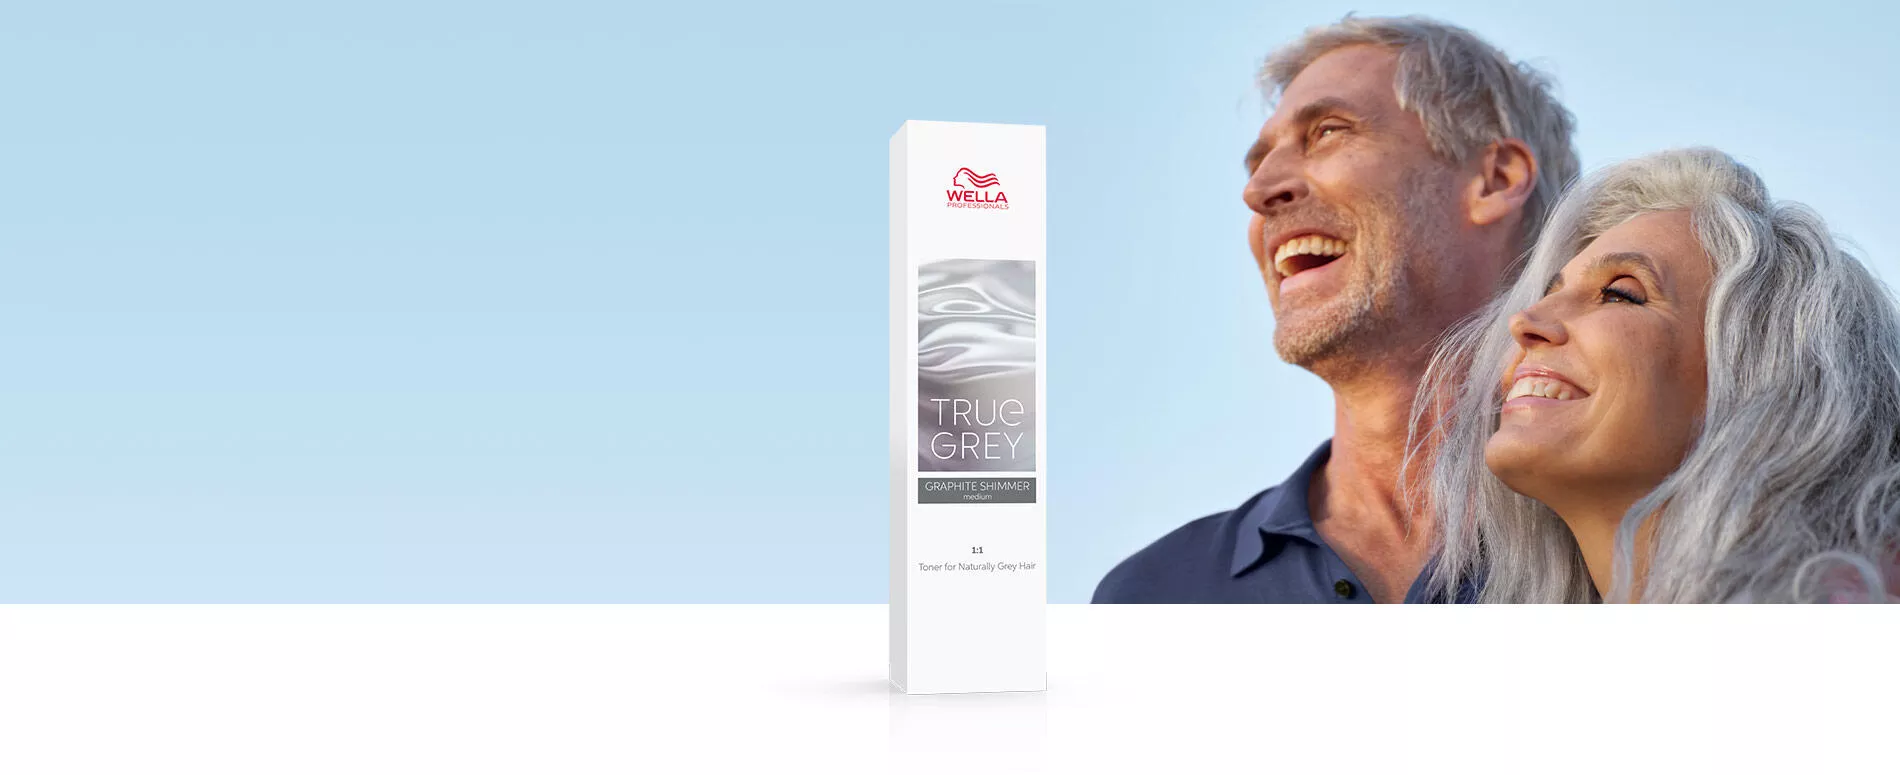 Male and female with natural grey hair laughing in the sun with True Grey toner bottle